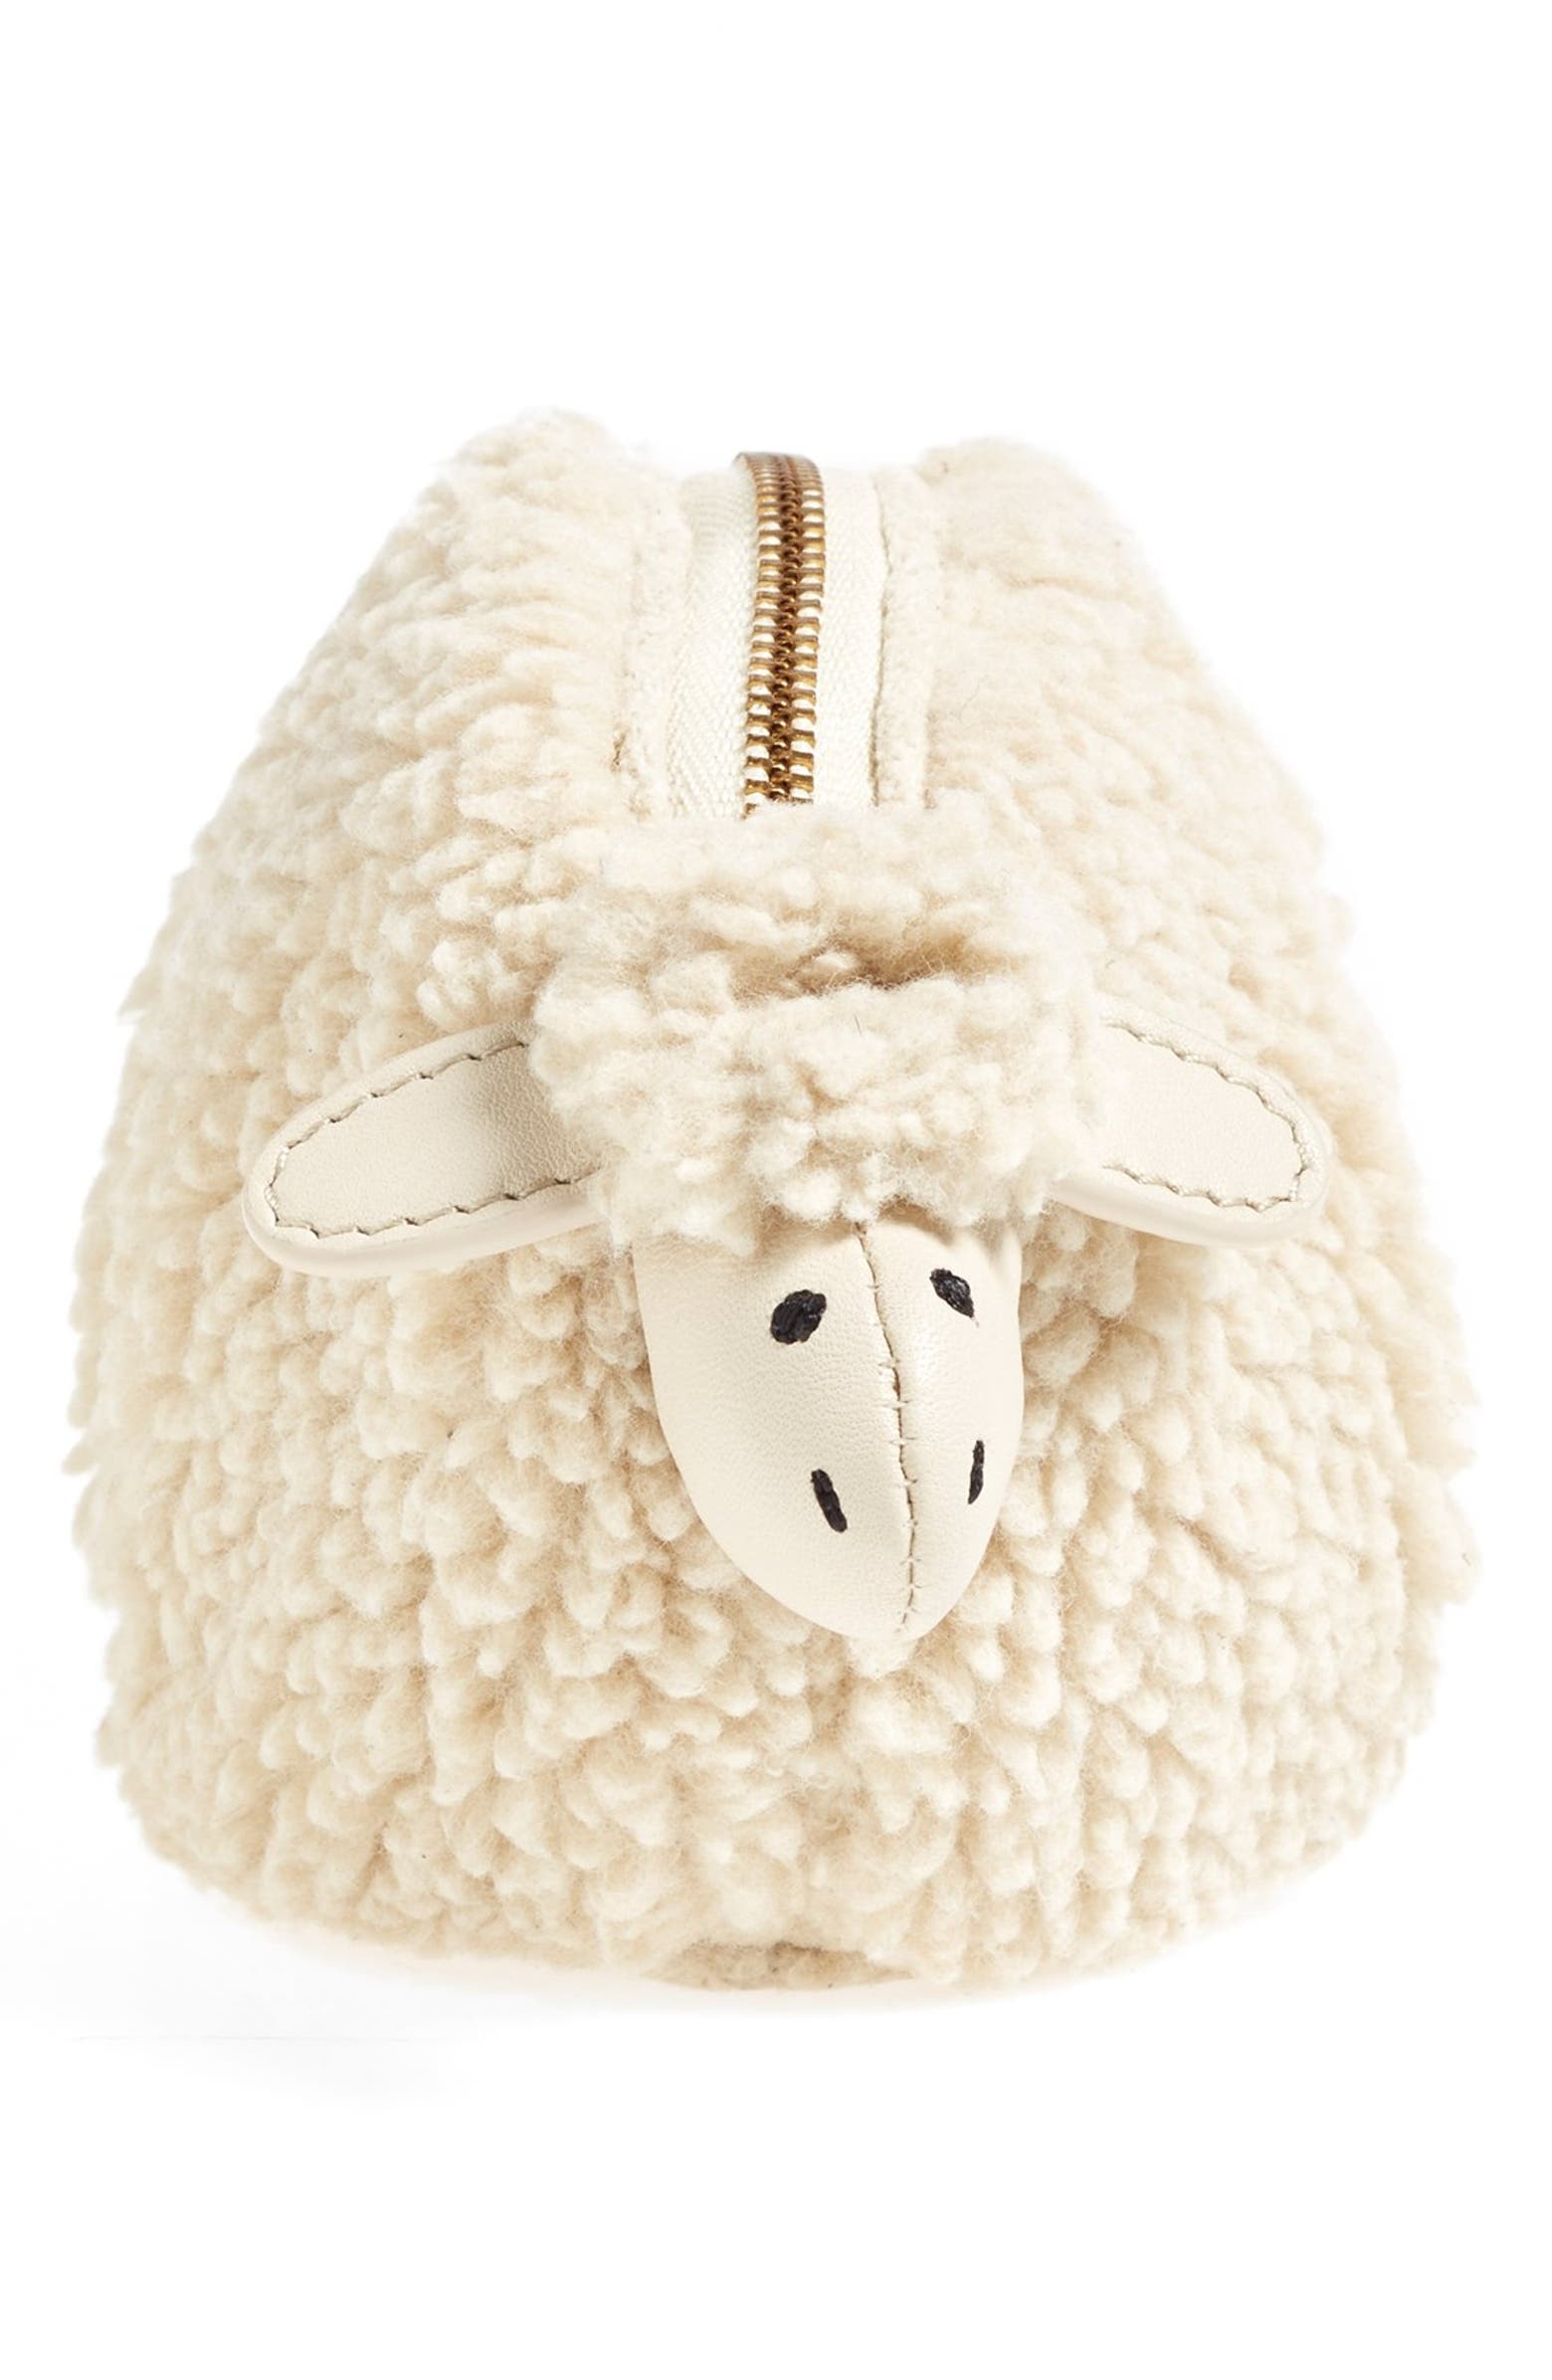 Tory Burch 'Larry the Lamb' Faux Shearling Bag Charm | Nordstrom